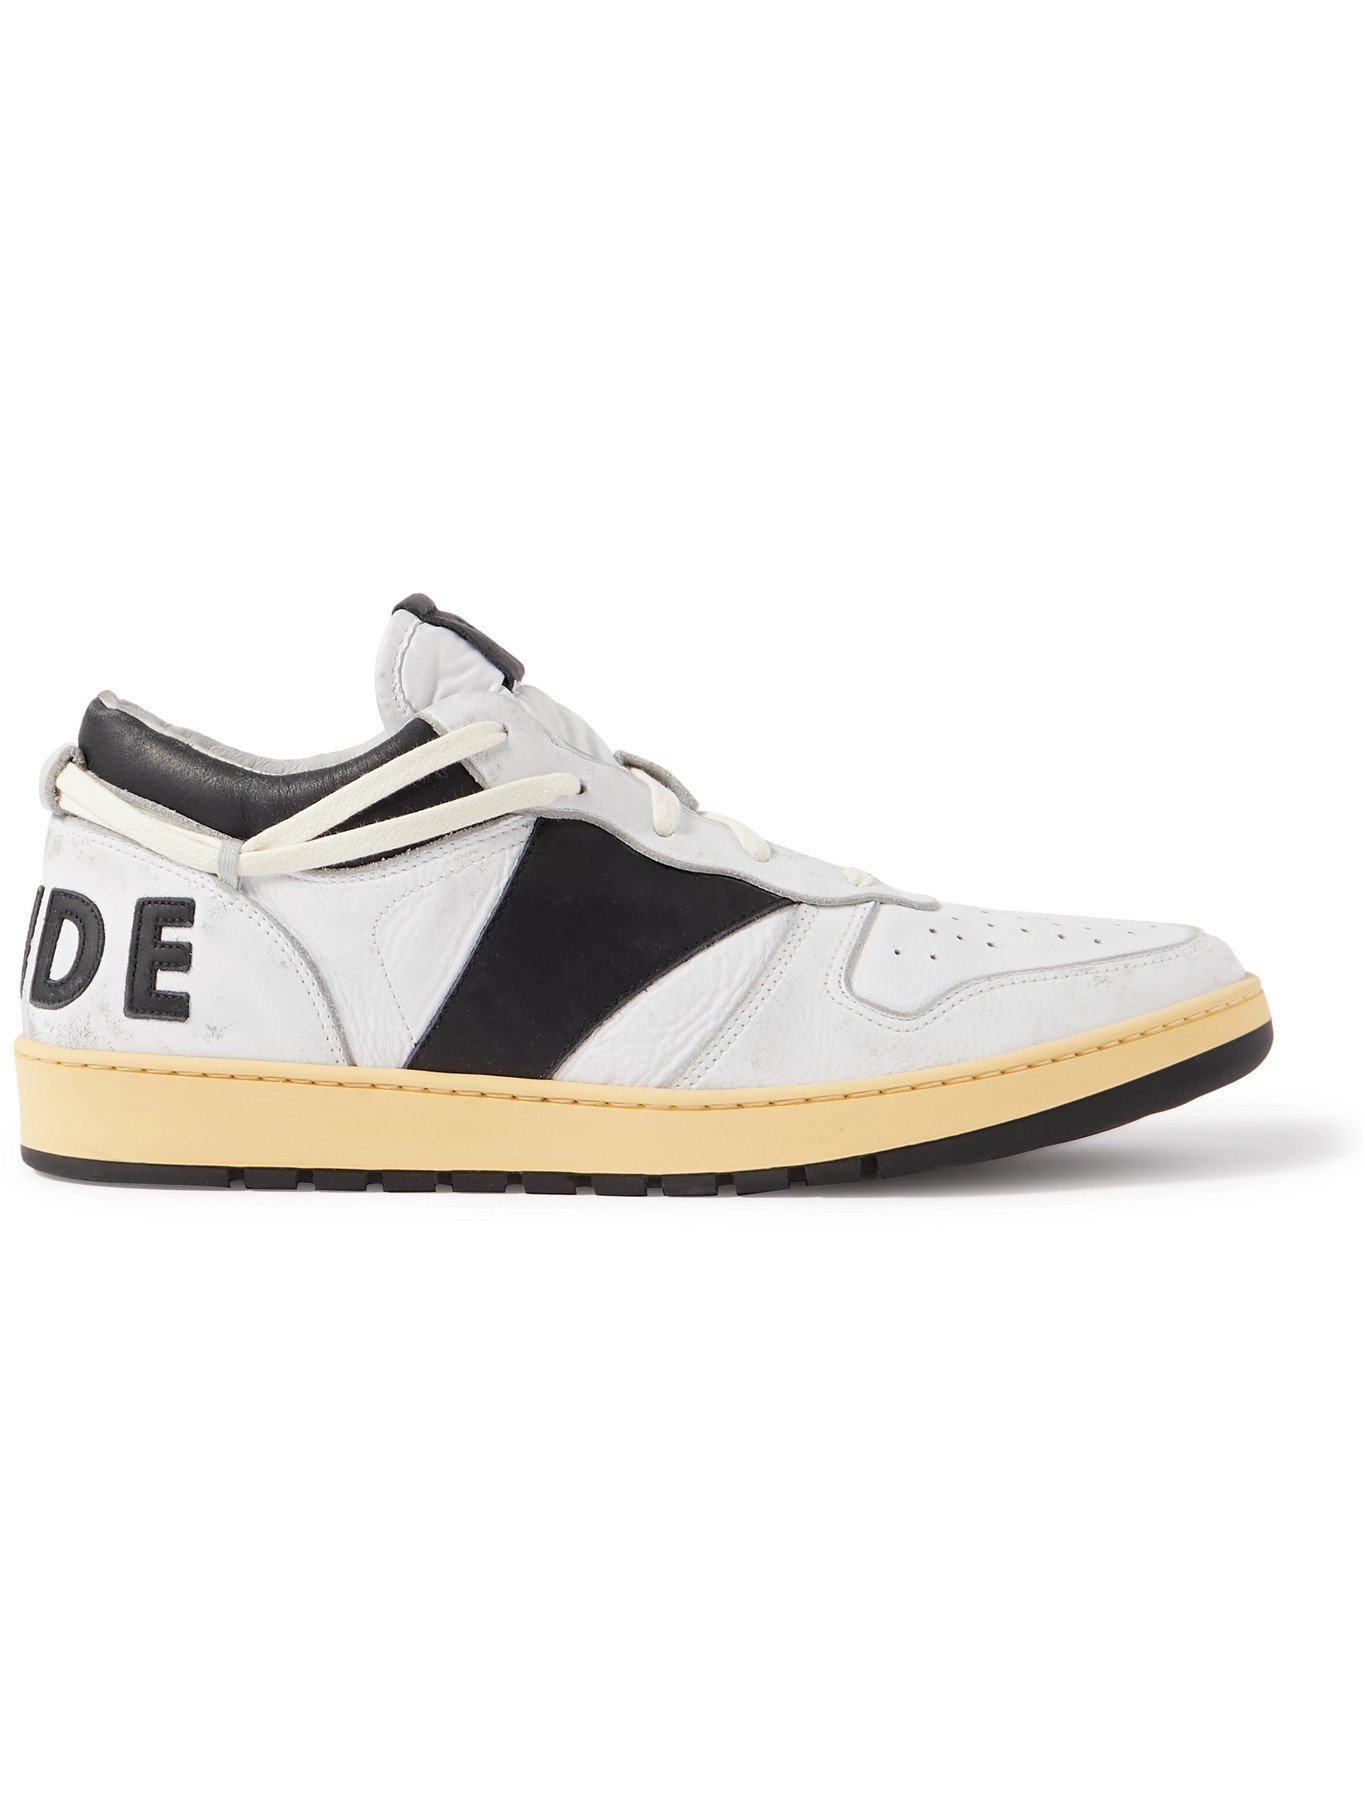 RHUDE - Rhecess Distressed Leather Sneakers - White - 13 Rhude